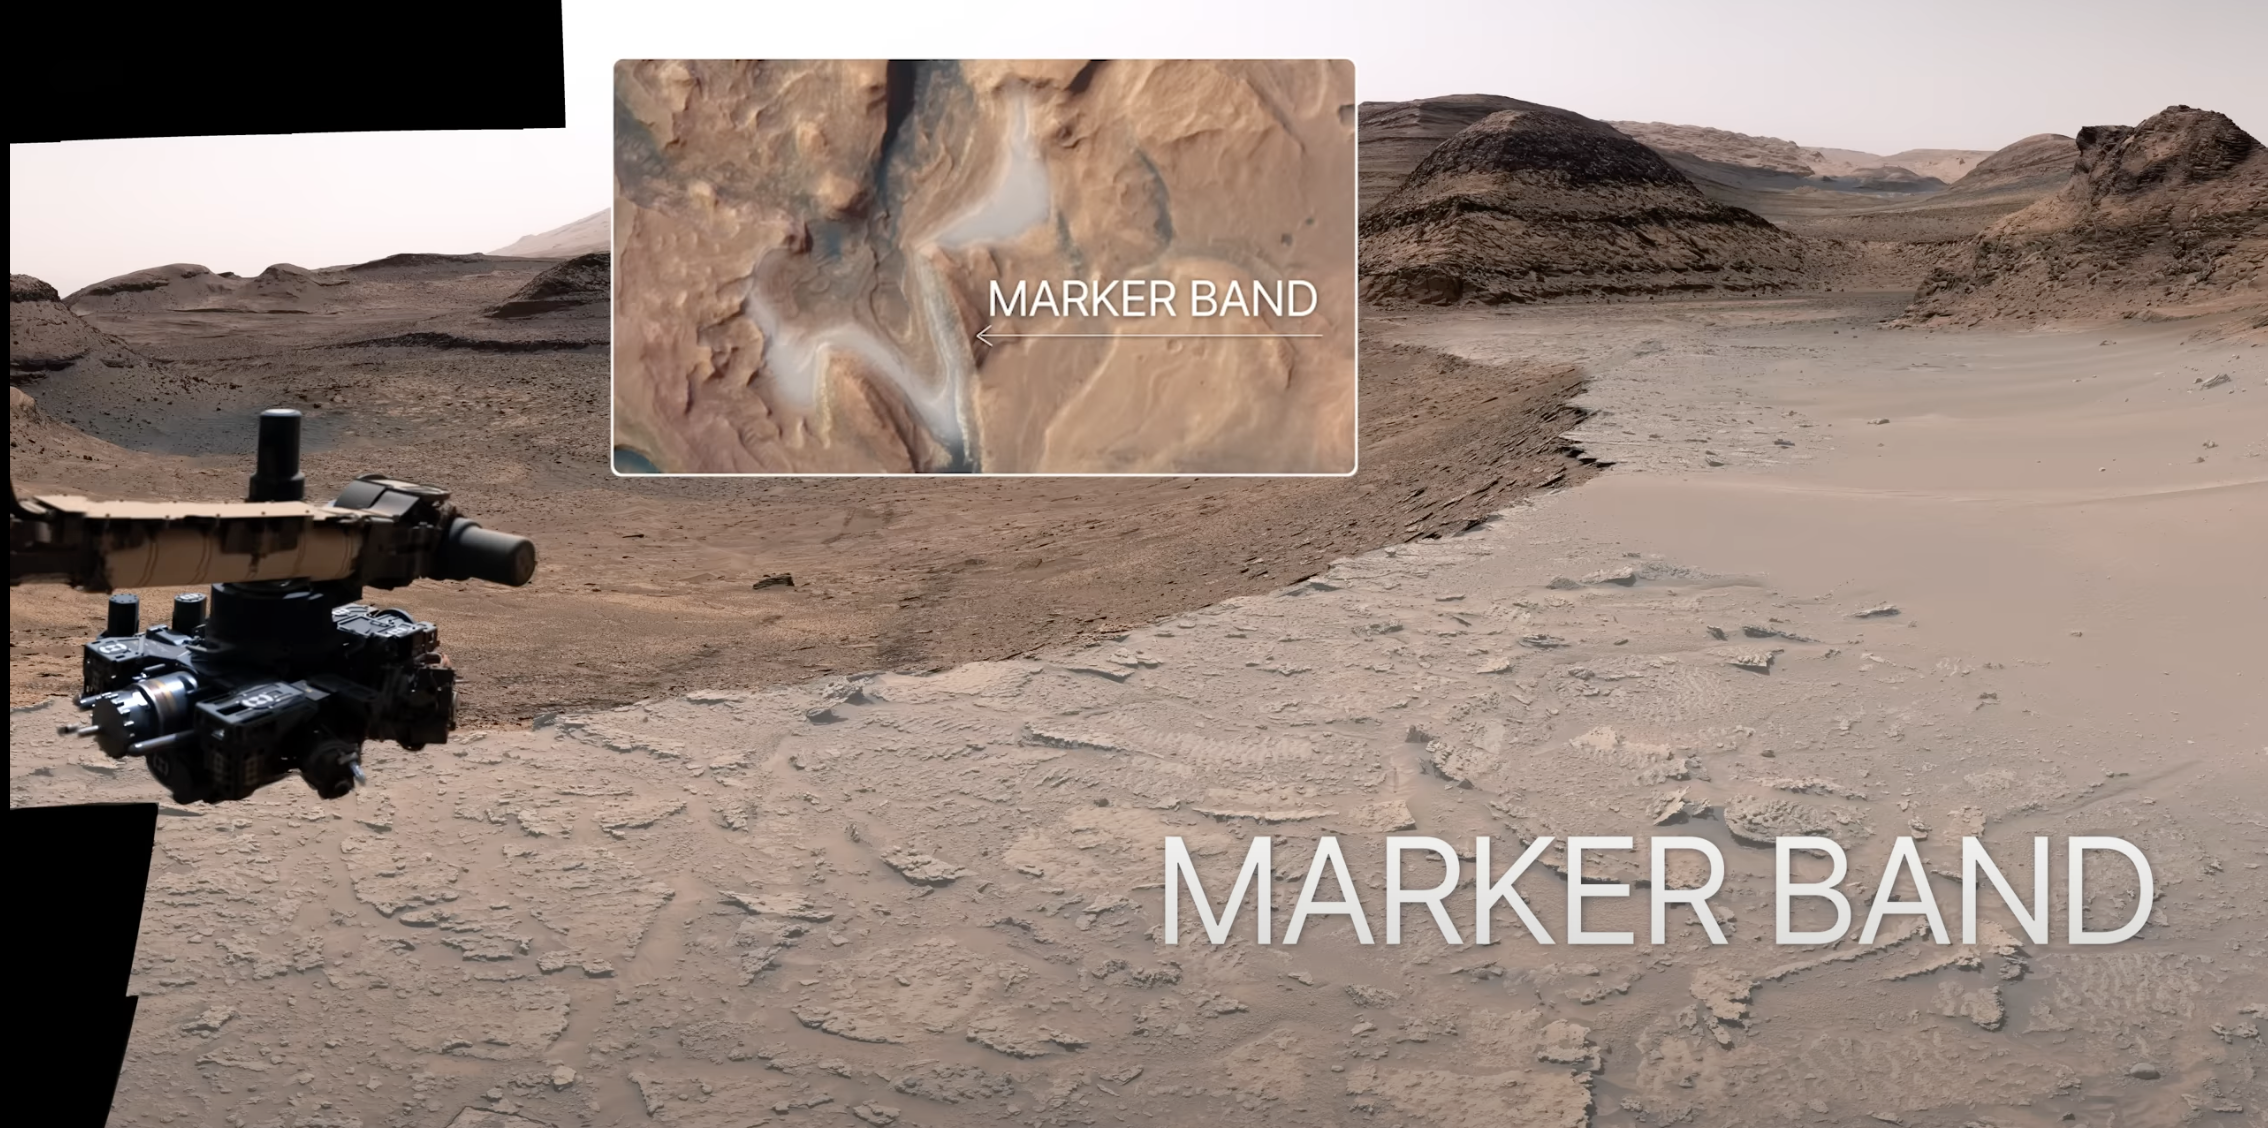 Curiosity Rover Marker Band Best Evidence of water and waves on Mars. Image Credit: NASA/JPL-Caltech/MSSS.